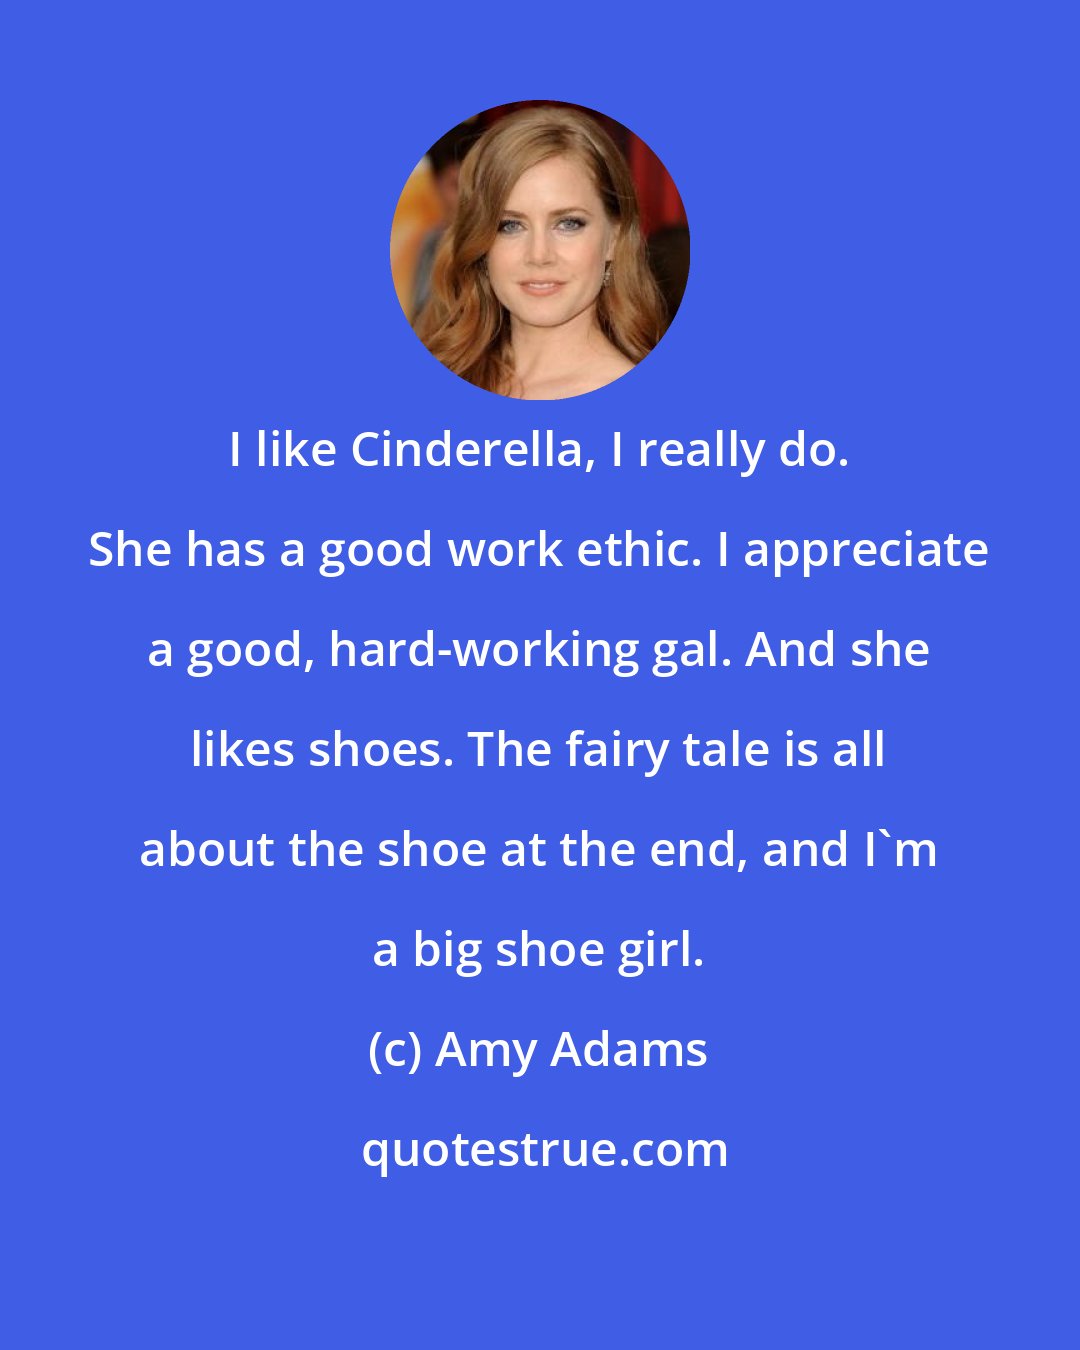 Amy Adams: I like Cinderella, I really do. She has a good work ethic. I appreciate a good, hard-working gal. And she likes shoes. The fairy tale is all about the shoe at the end, and I'm a big shoe girl.